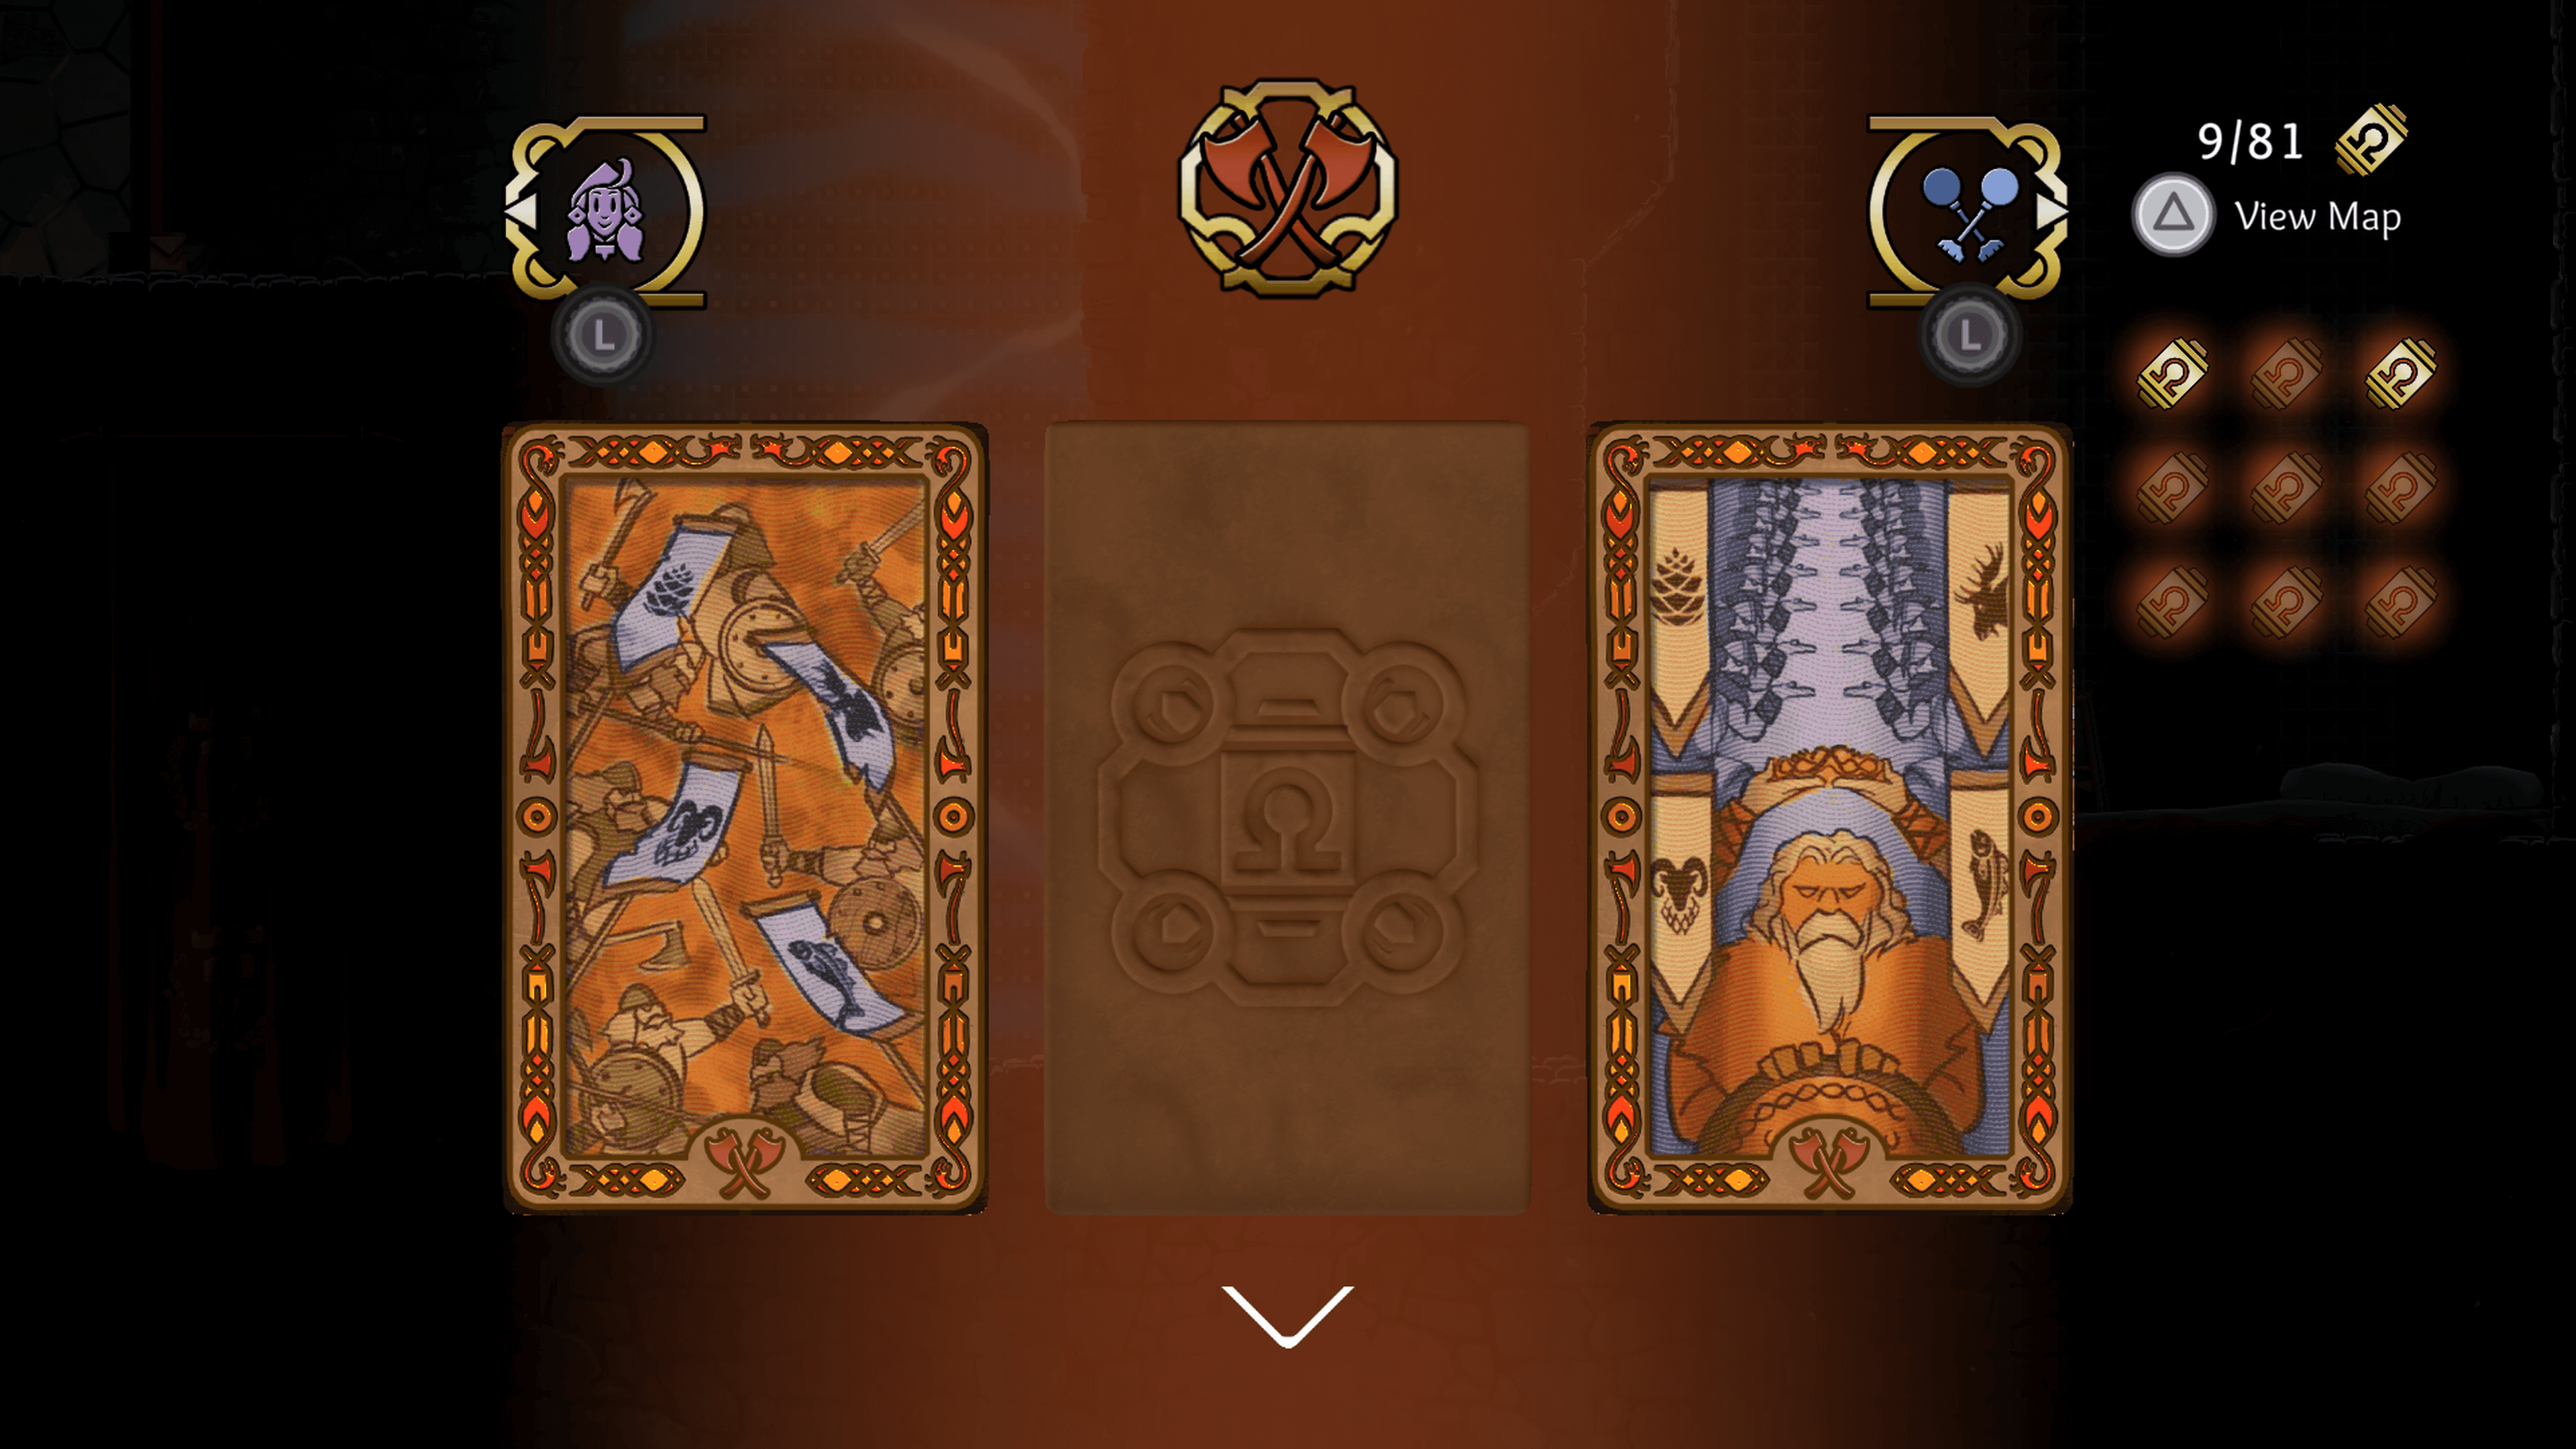 3 slots showing ornately detailed Norse cards in the left and right slot with the middle slot empty. The top right shows that 9 out of a possible 81 cards have been collected